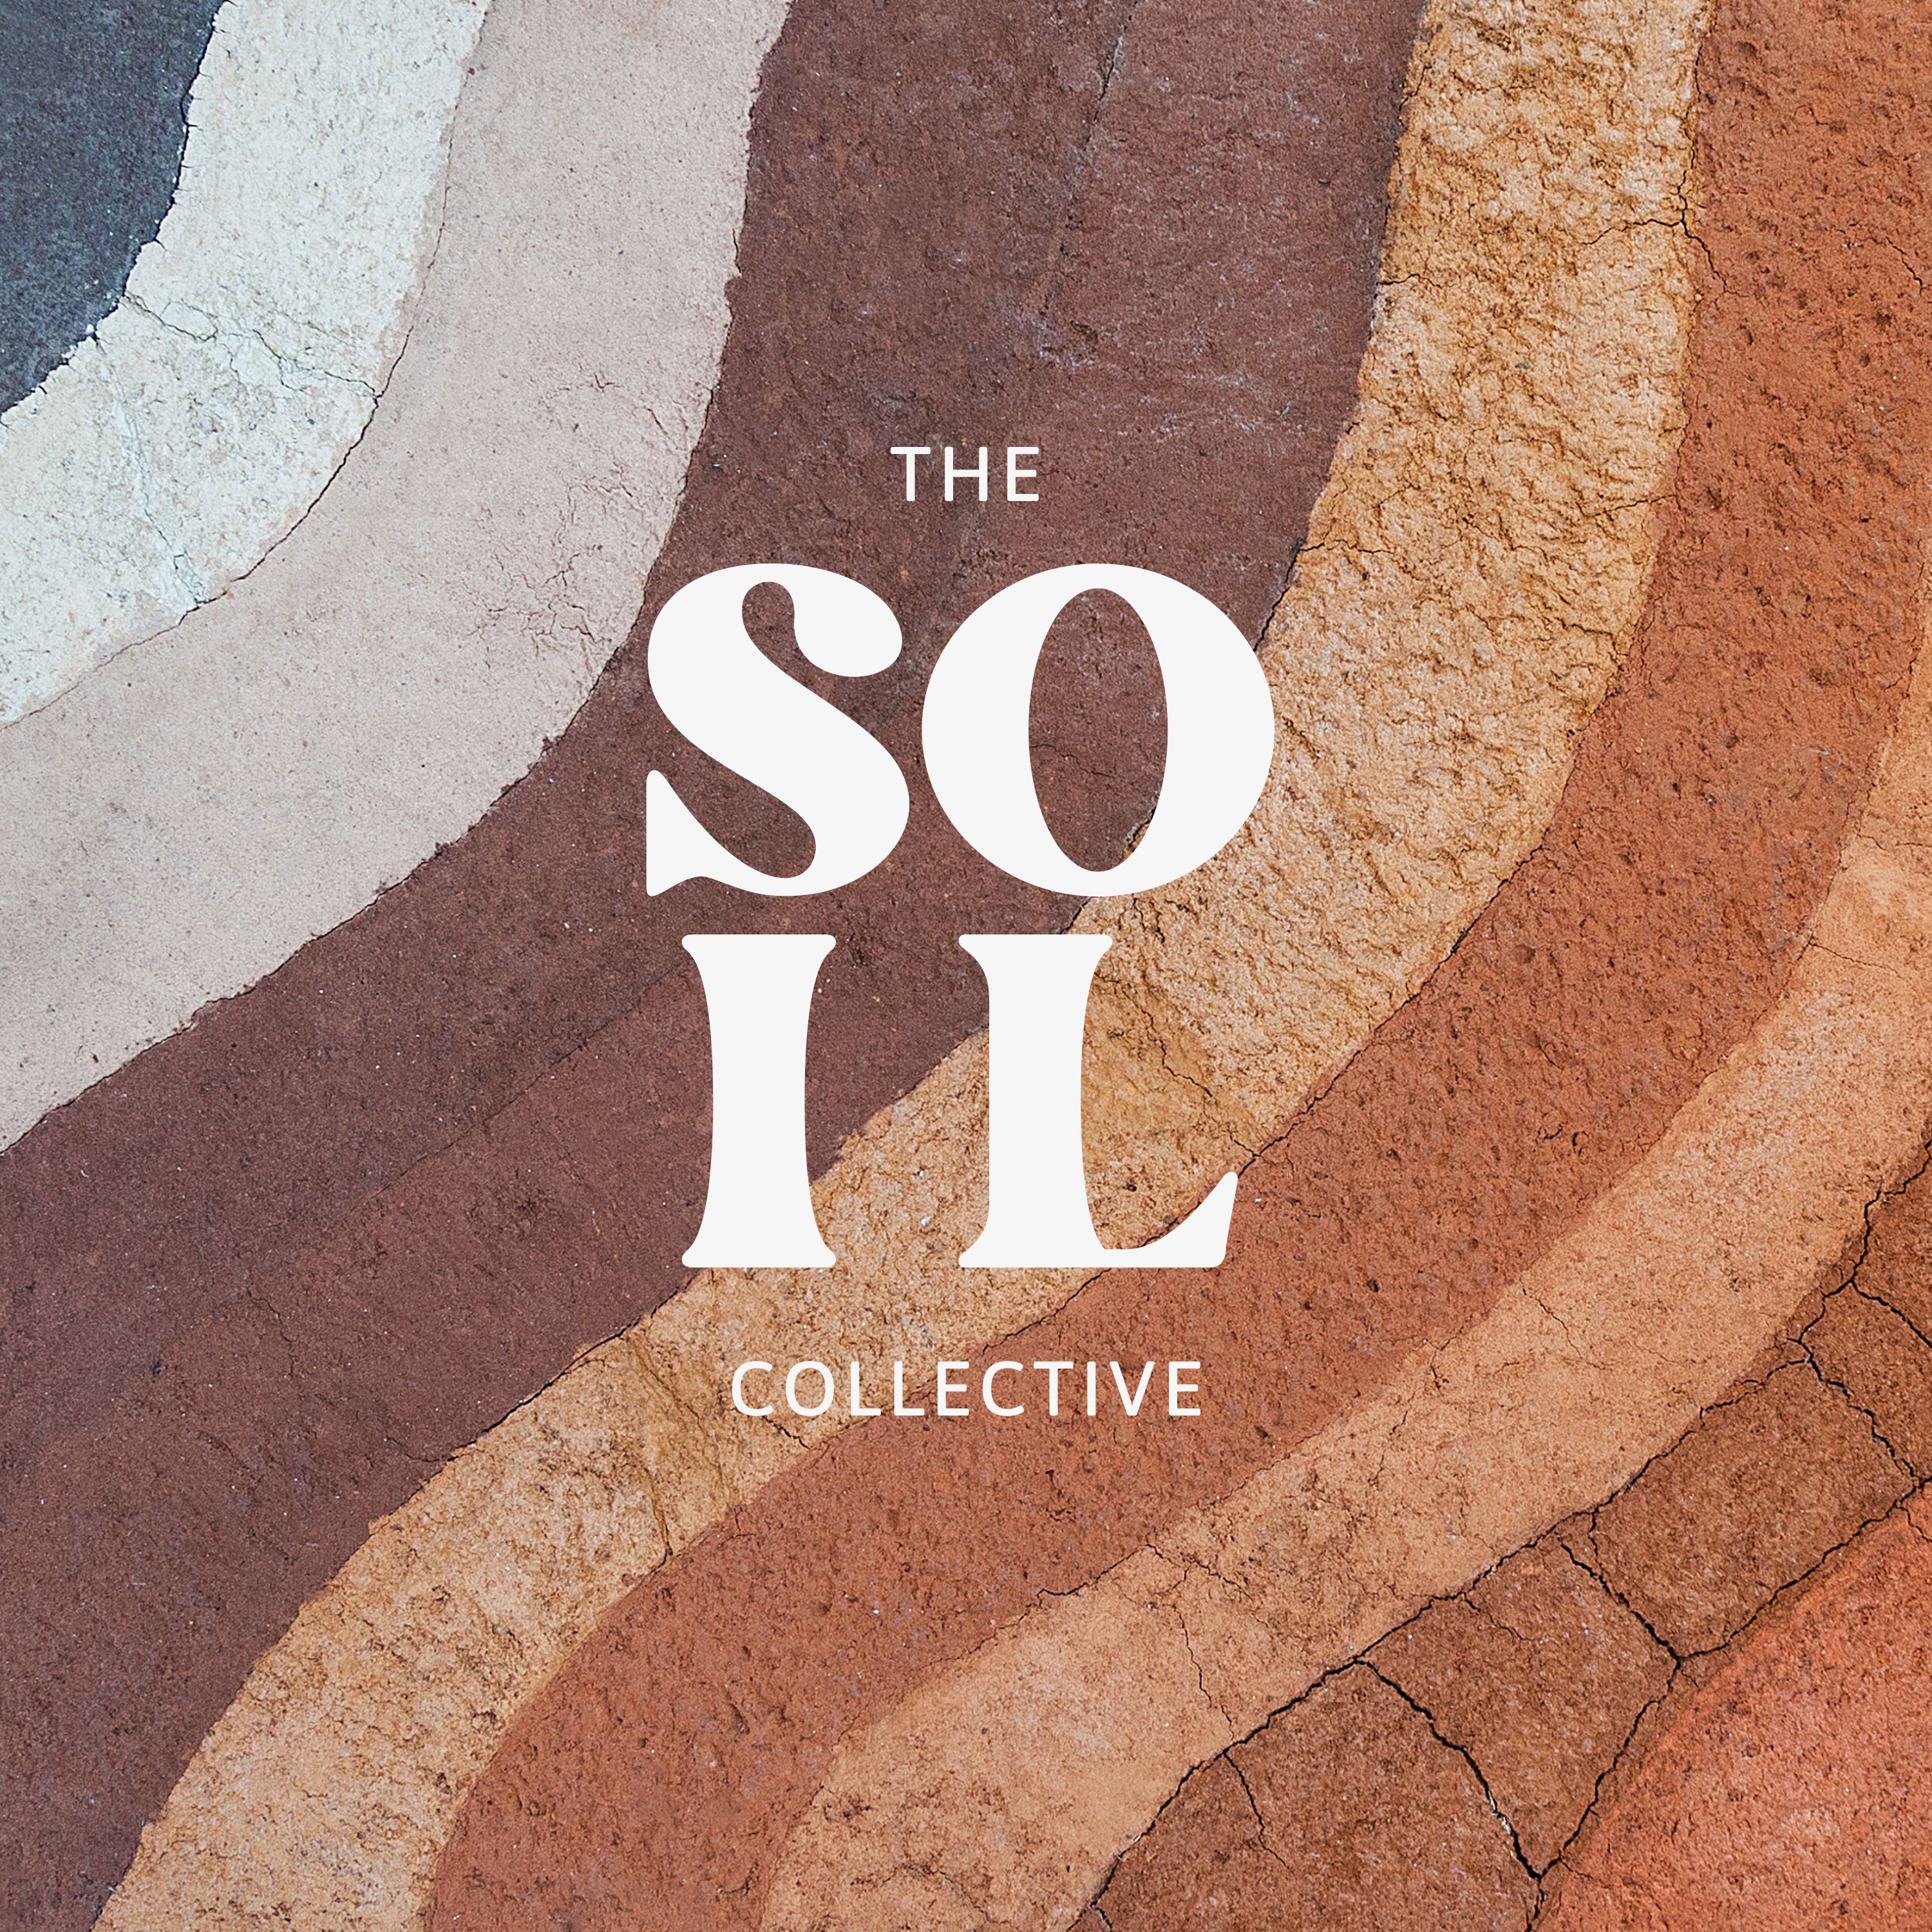 Show artwork for The Soil Collective